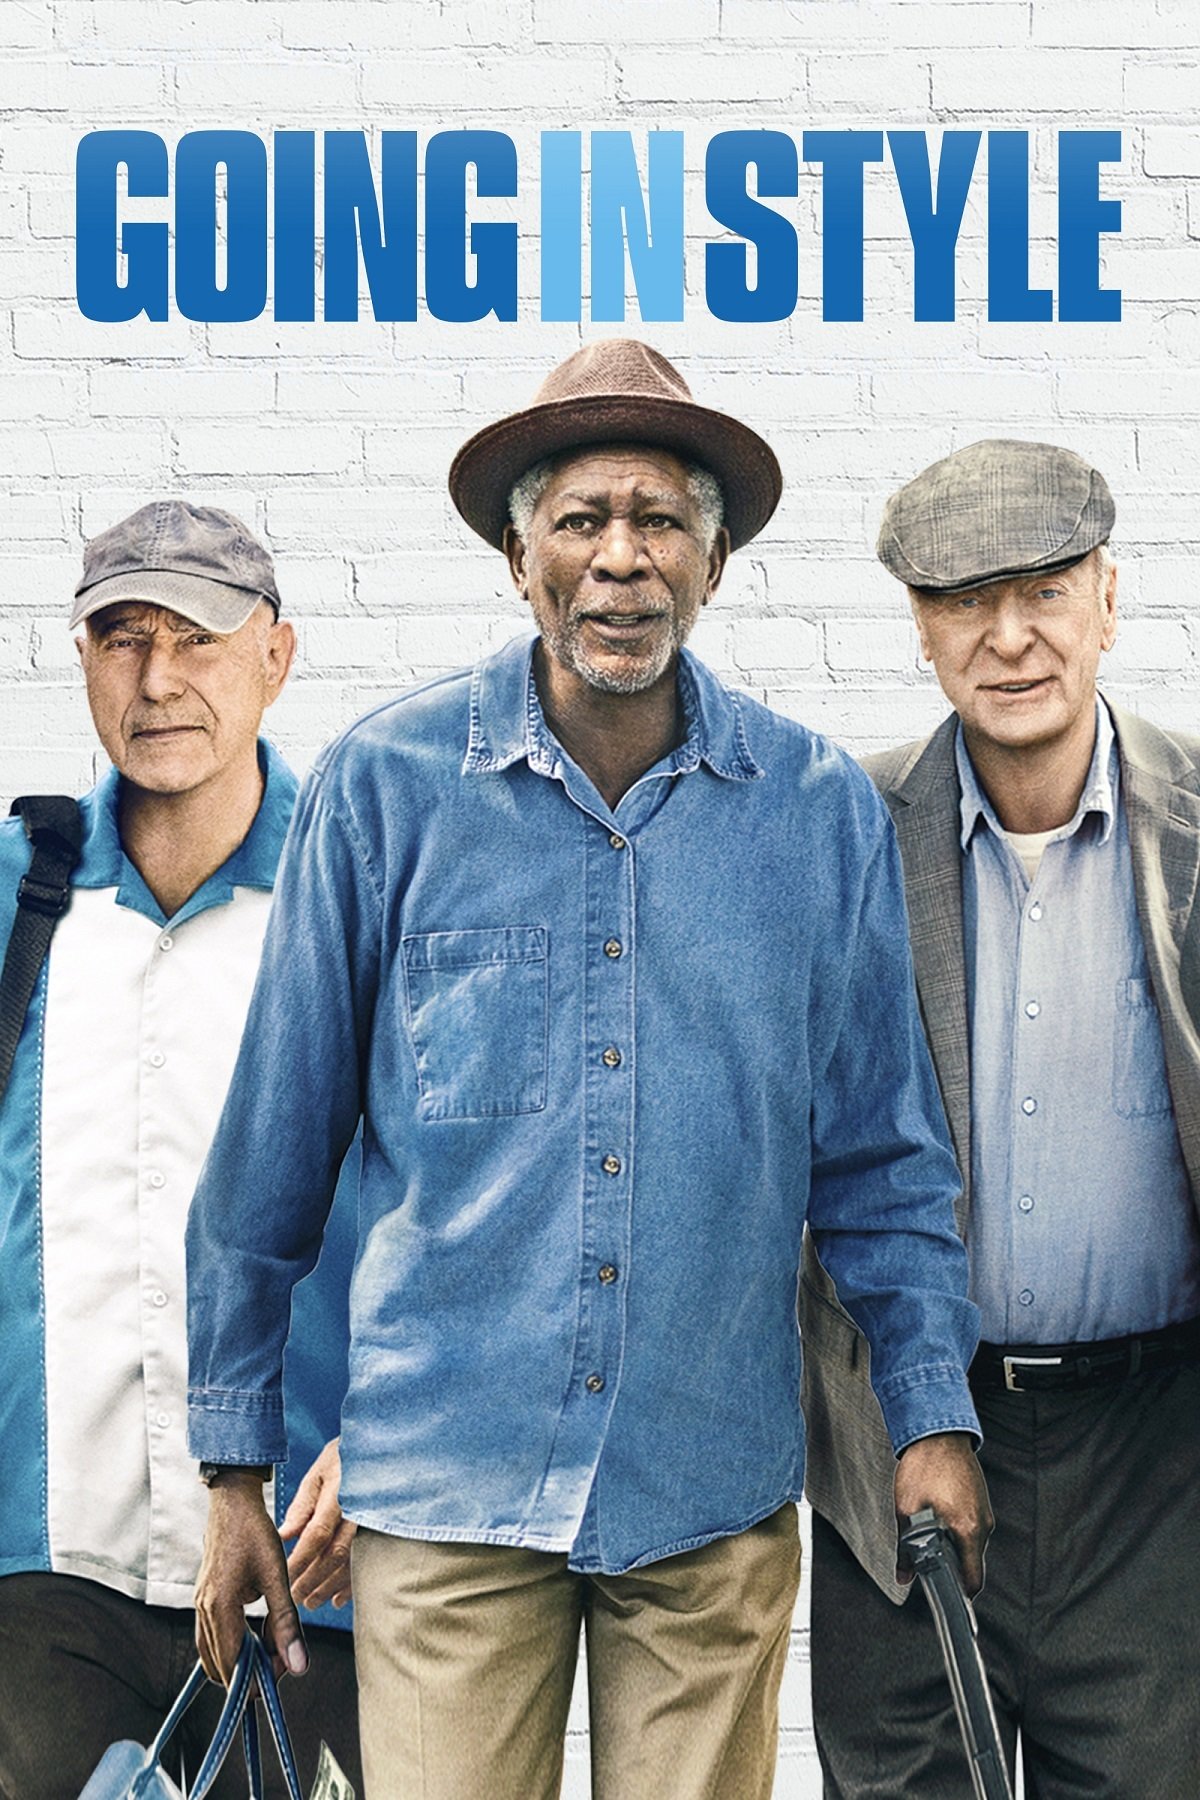 Poster for the movie "Going in Style"